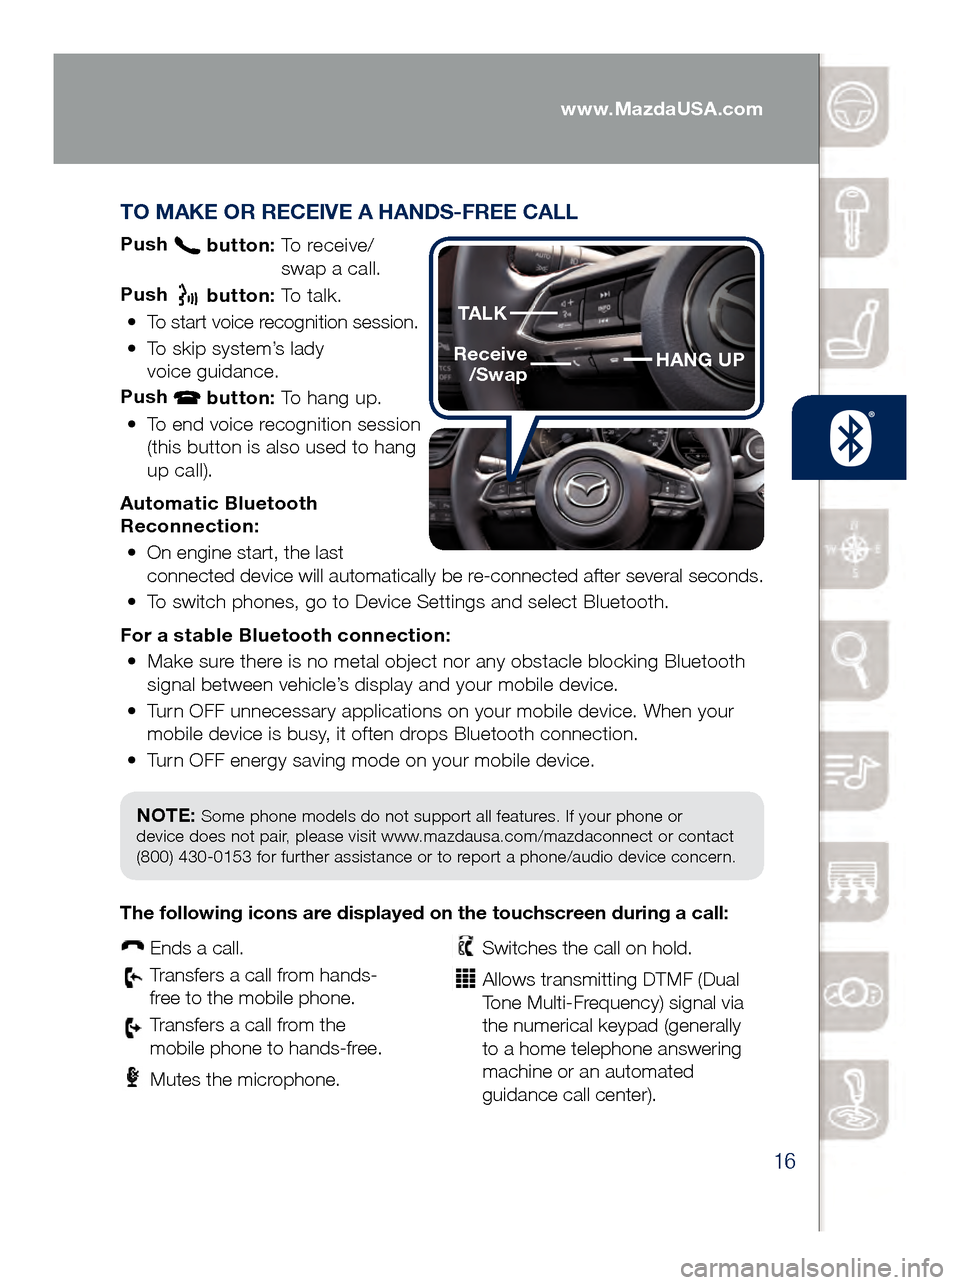 MAZDA MODEL 6 2017  Quick Start Guide (in English) 16
TO MAKE OR RECEIVE A HANDS-FREE CALL
Push  button:  To receive/  
swa p a call.
Push  
 button:  To talk.
•
   To start voice recognition session.
•
    To skip system’s lady

  
voice guidan